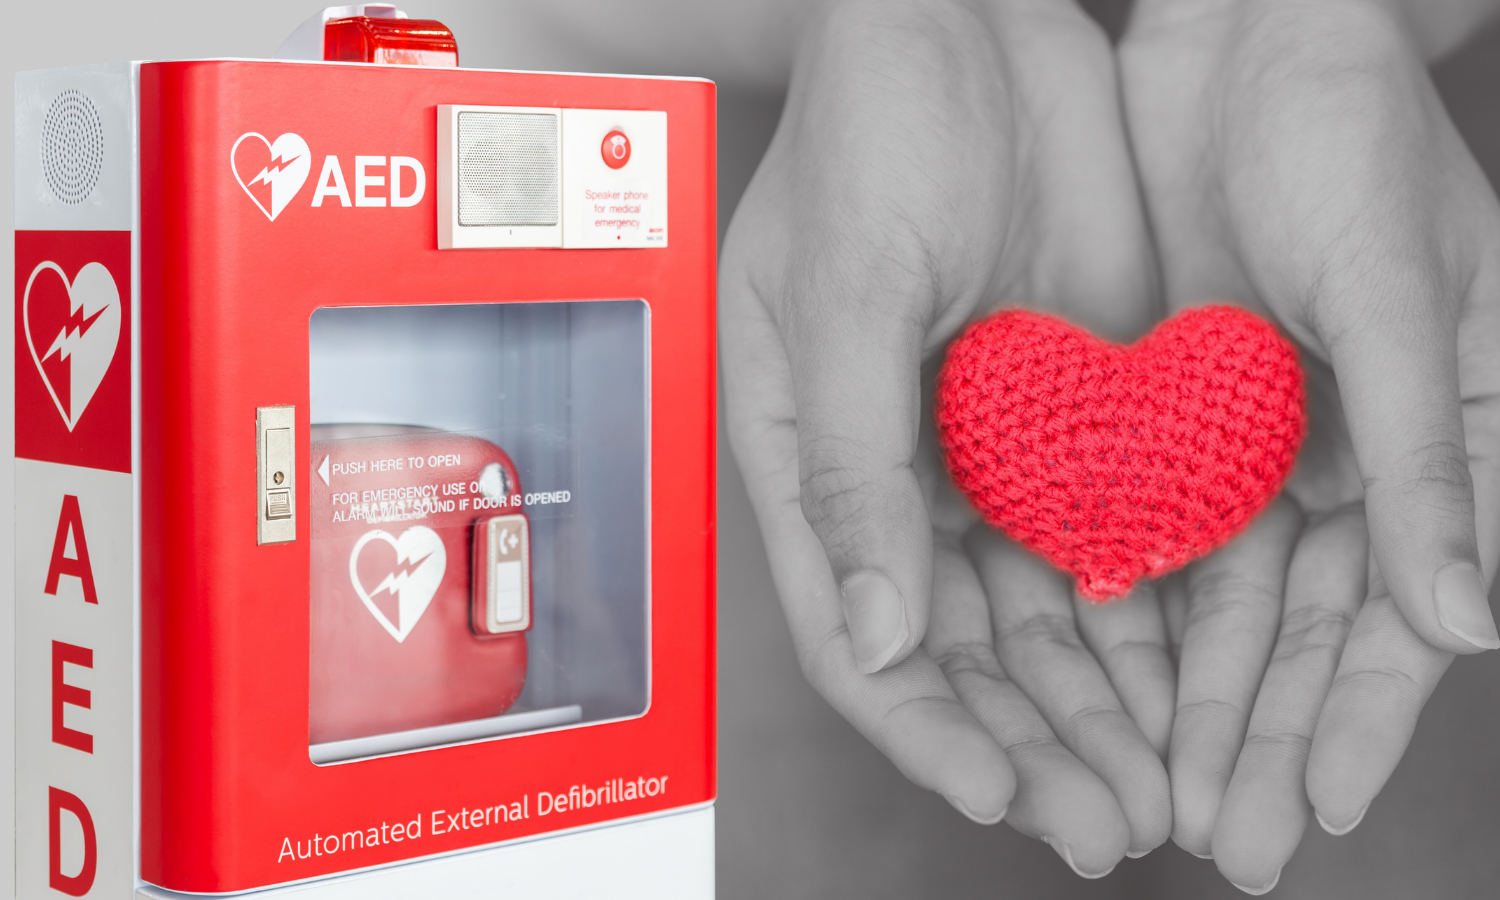 Know how to use Defibrillators to Save Lives